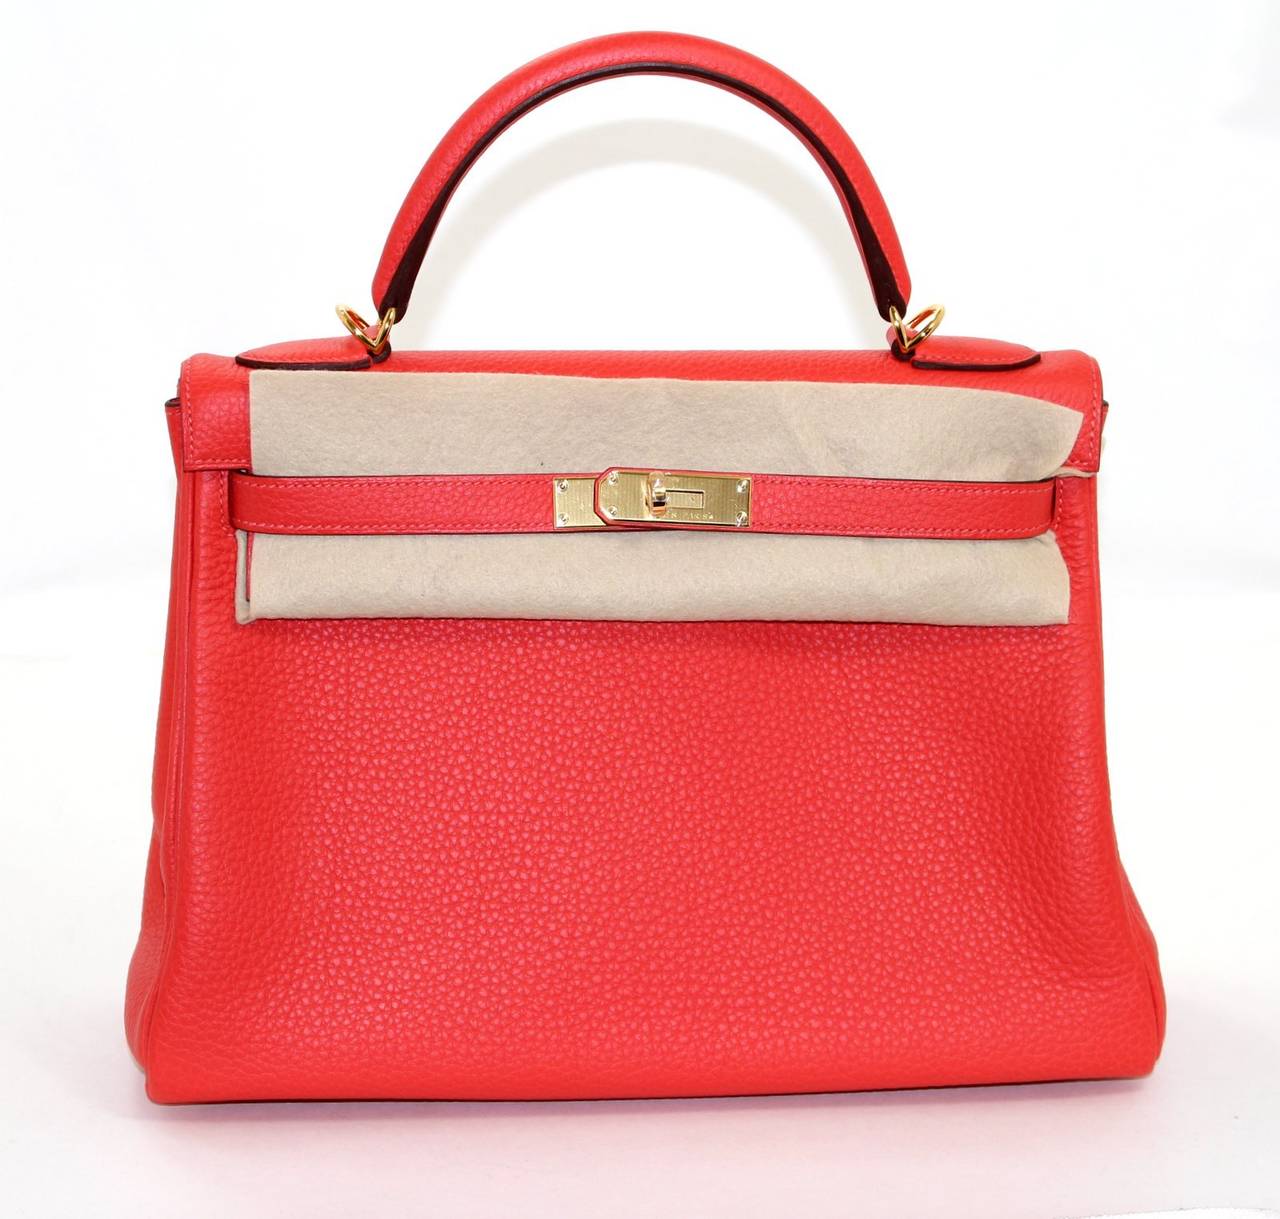 Hermes Kelly Bag in Rouge Pivoine Clemence Red Leather, GHW, 32 cm size 1